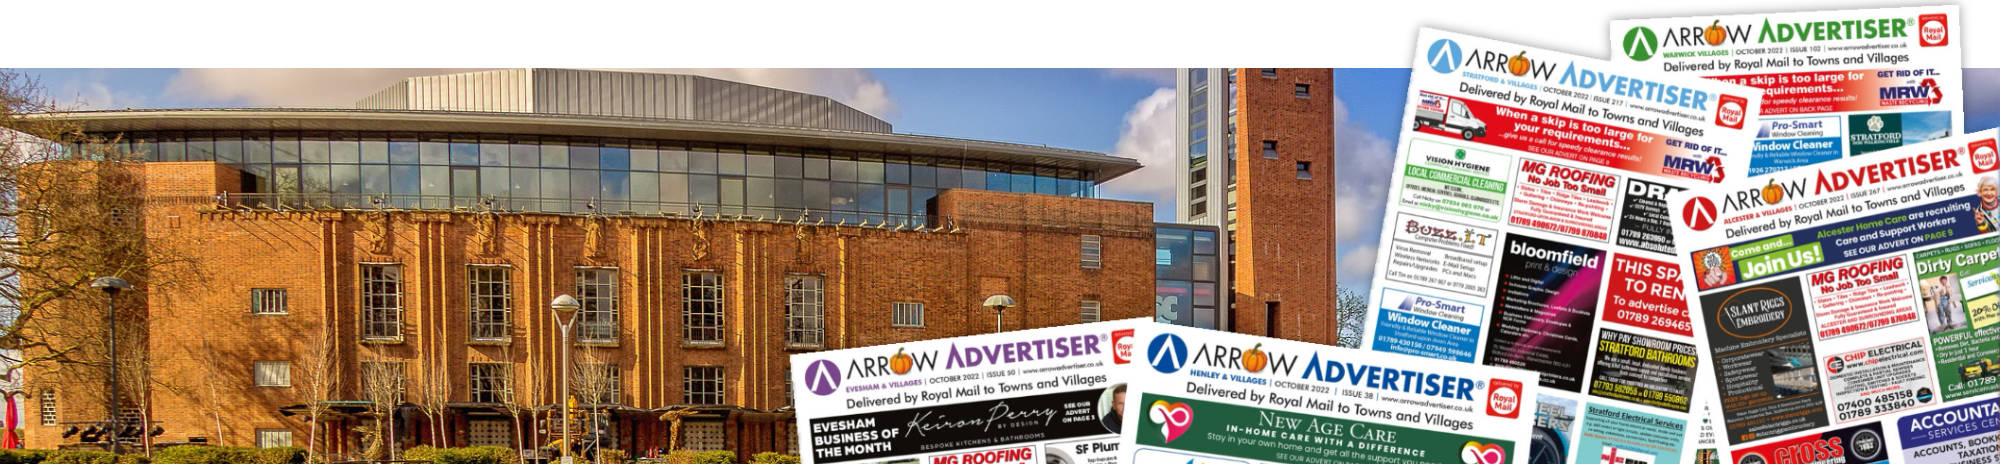 The Arrow Advertiser - Local Businesses, Events and Clubs